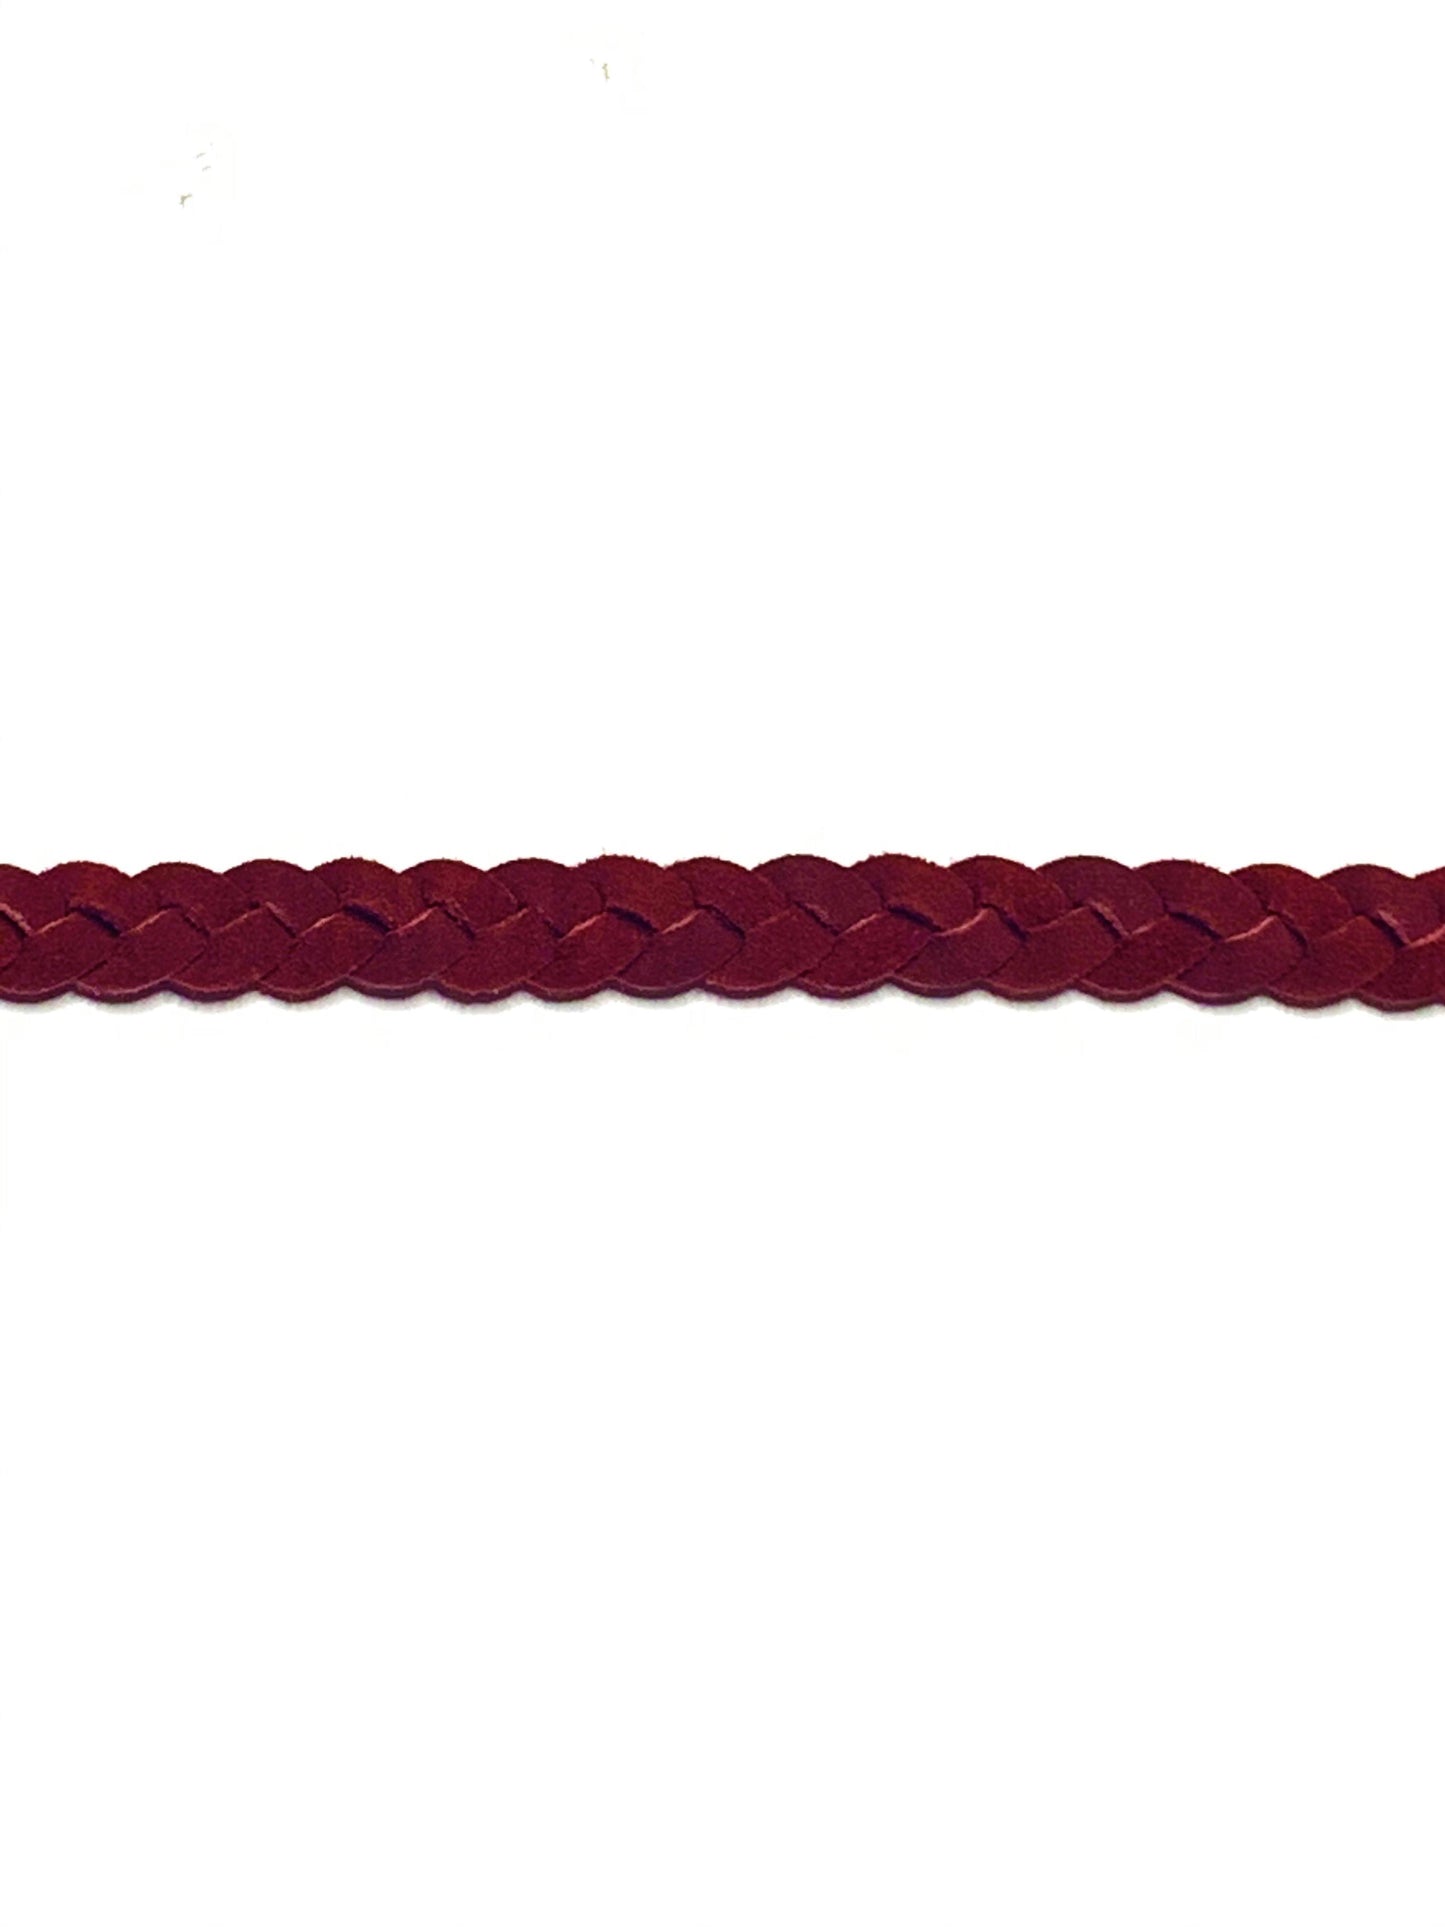 Red Burgundy Braided Leather Hat Band